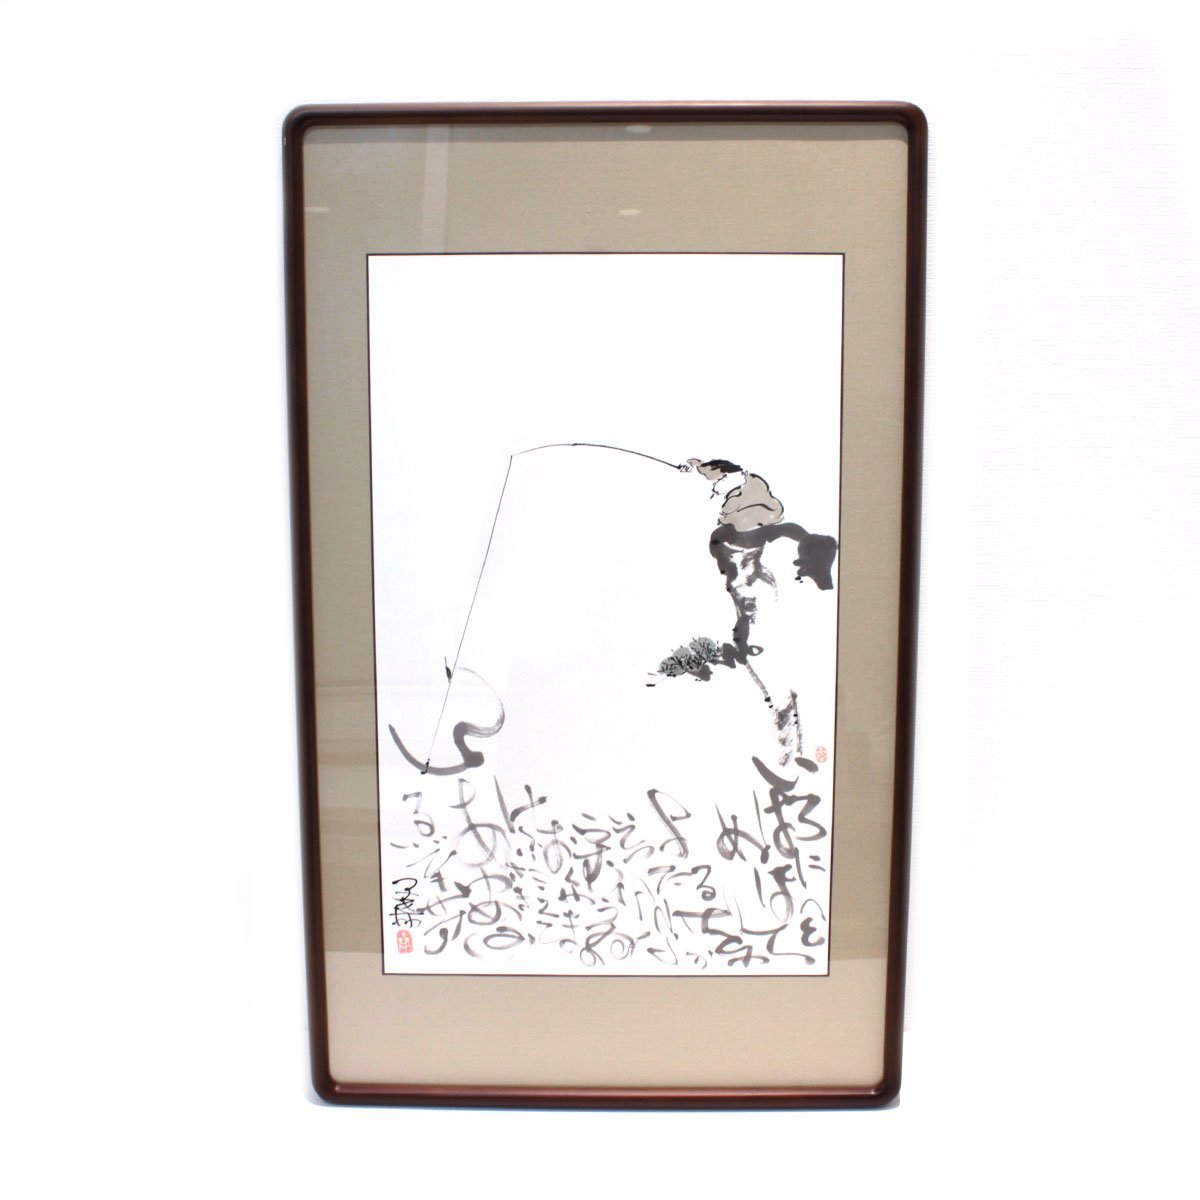 Fishing Happiness by Kosairin, ink painting, frame included, shipping 880 yen, Artwork, Painting, Ink painting